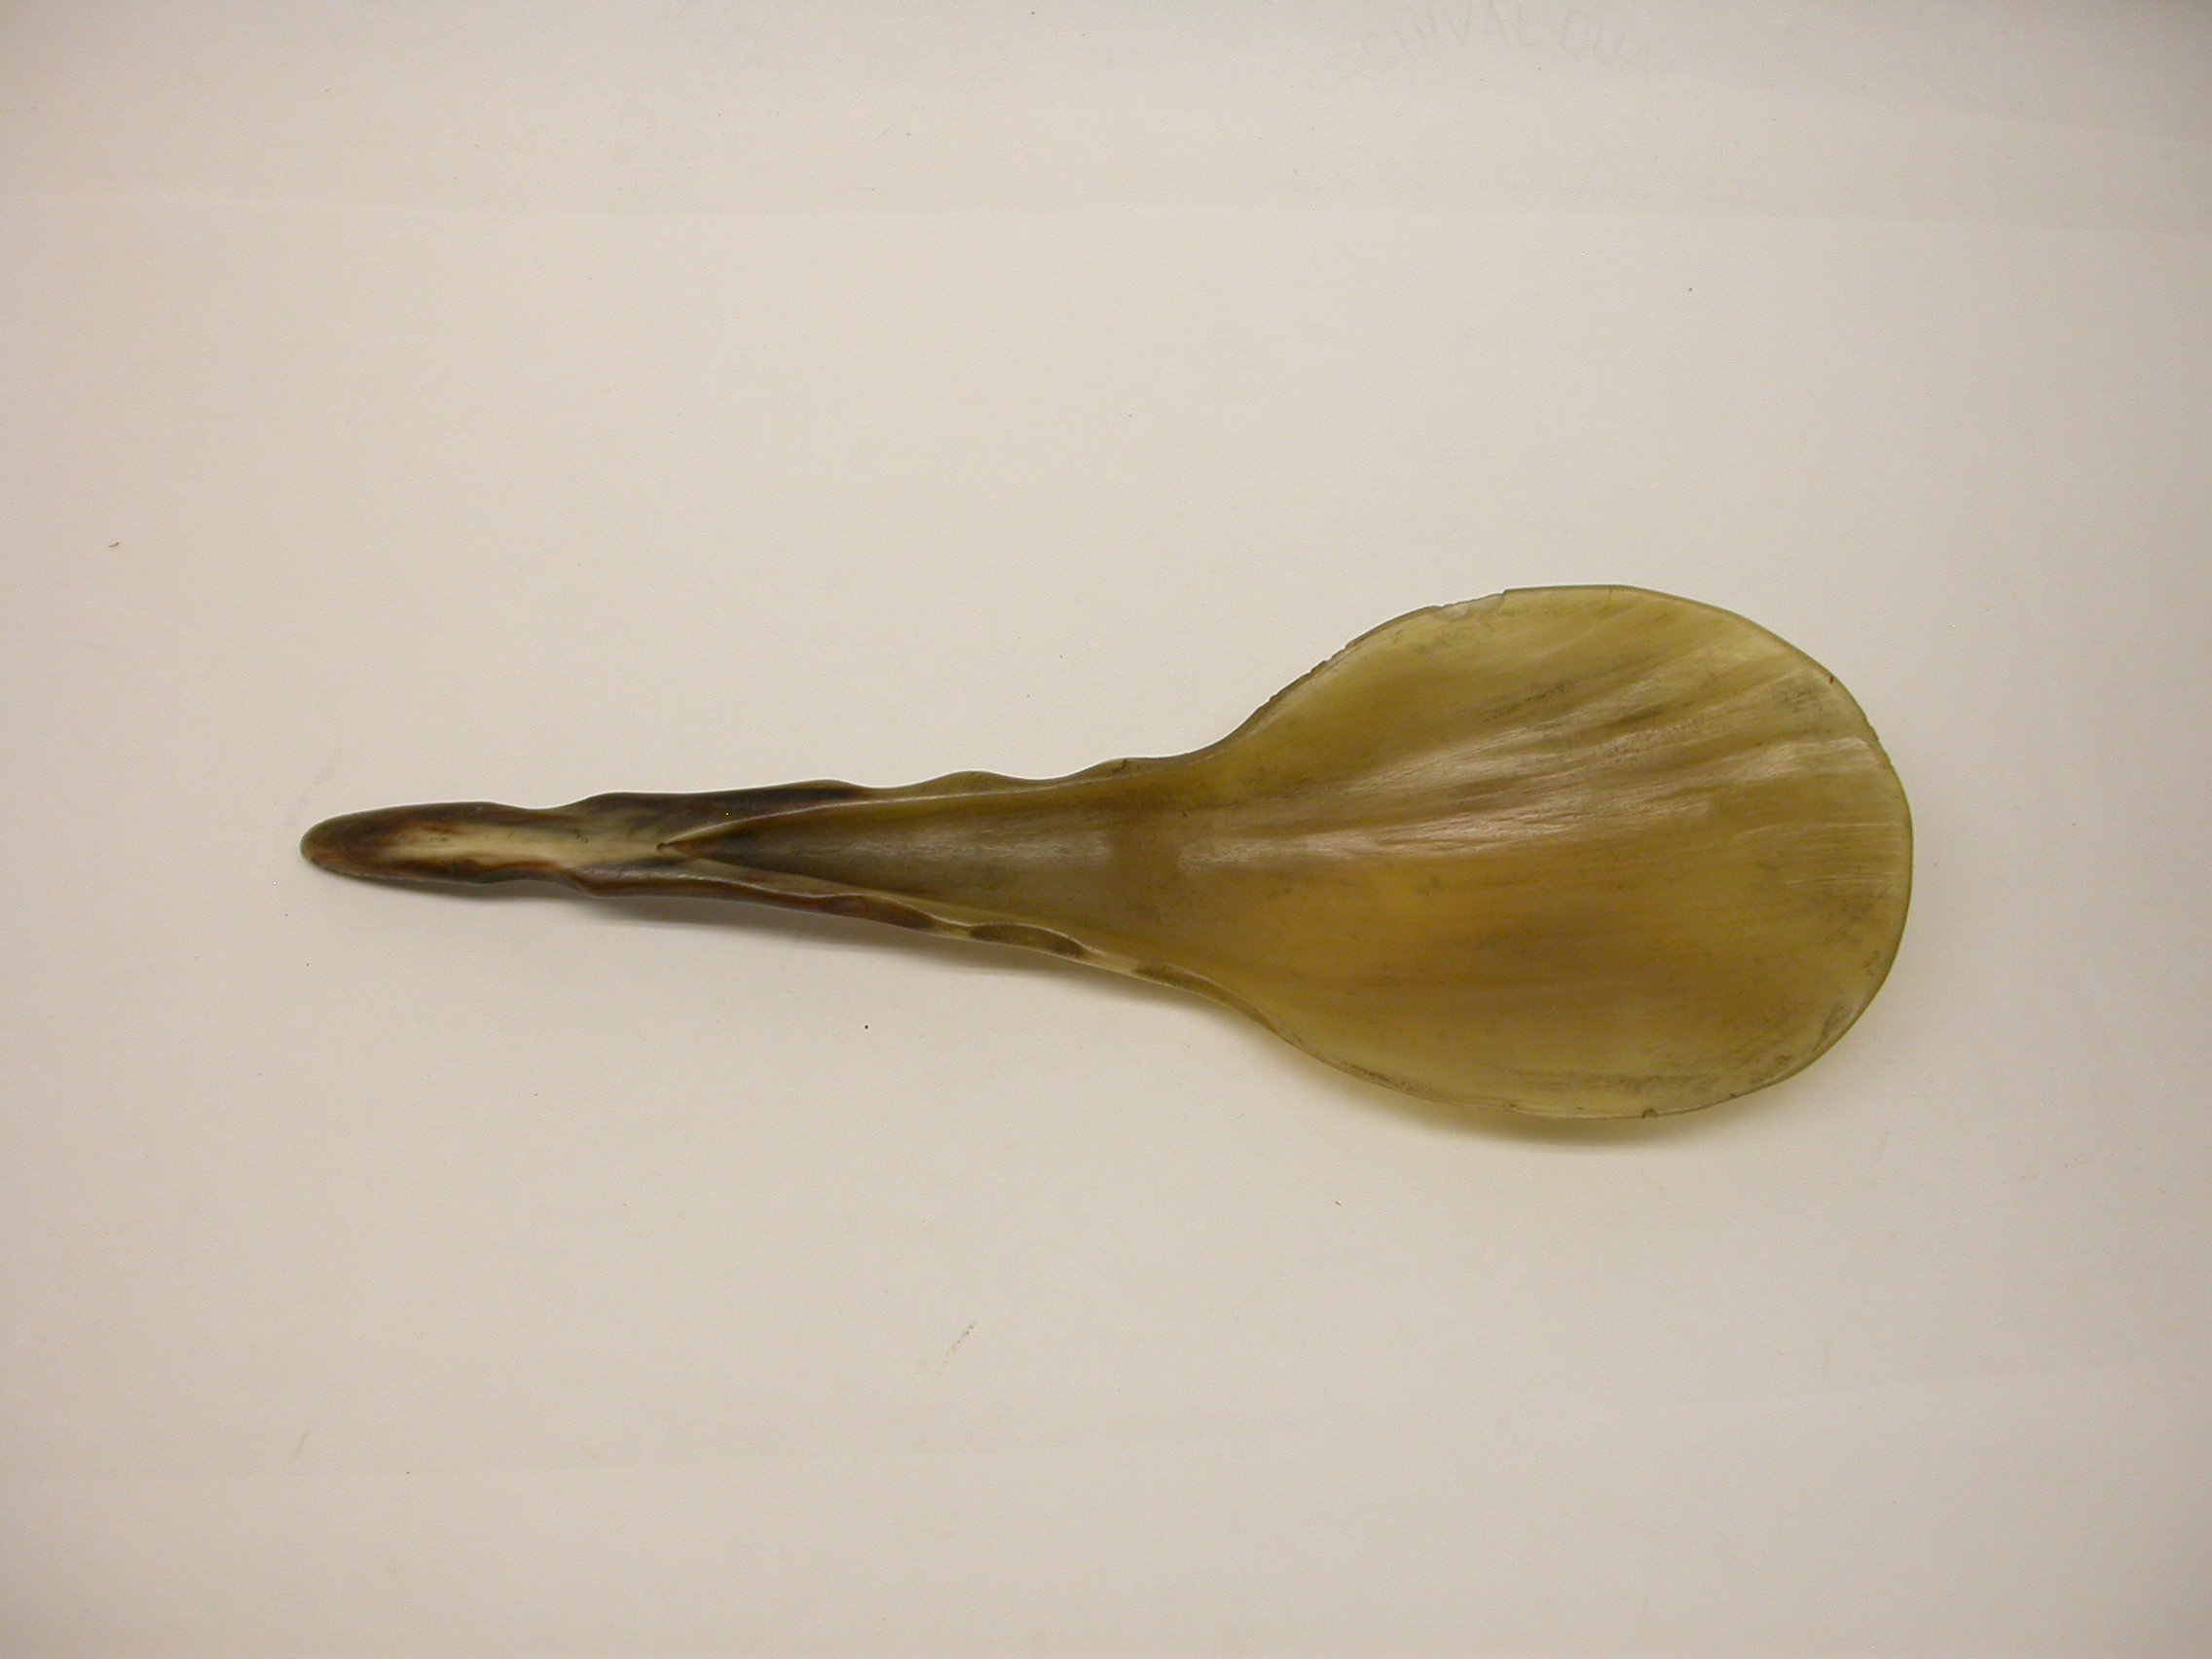 a%20spoon%20made%20out%20of%20horn%20wood